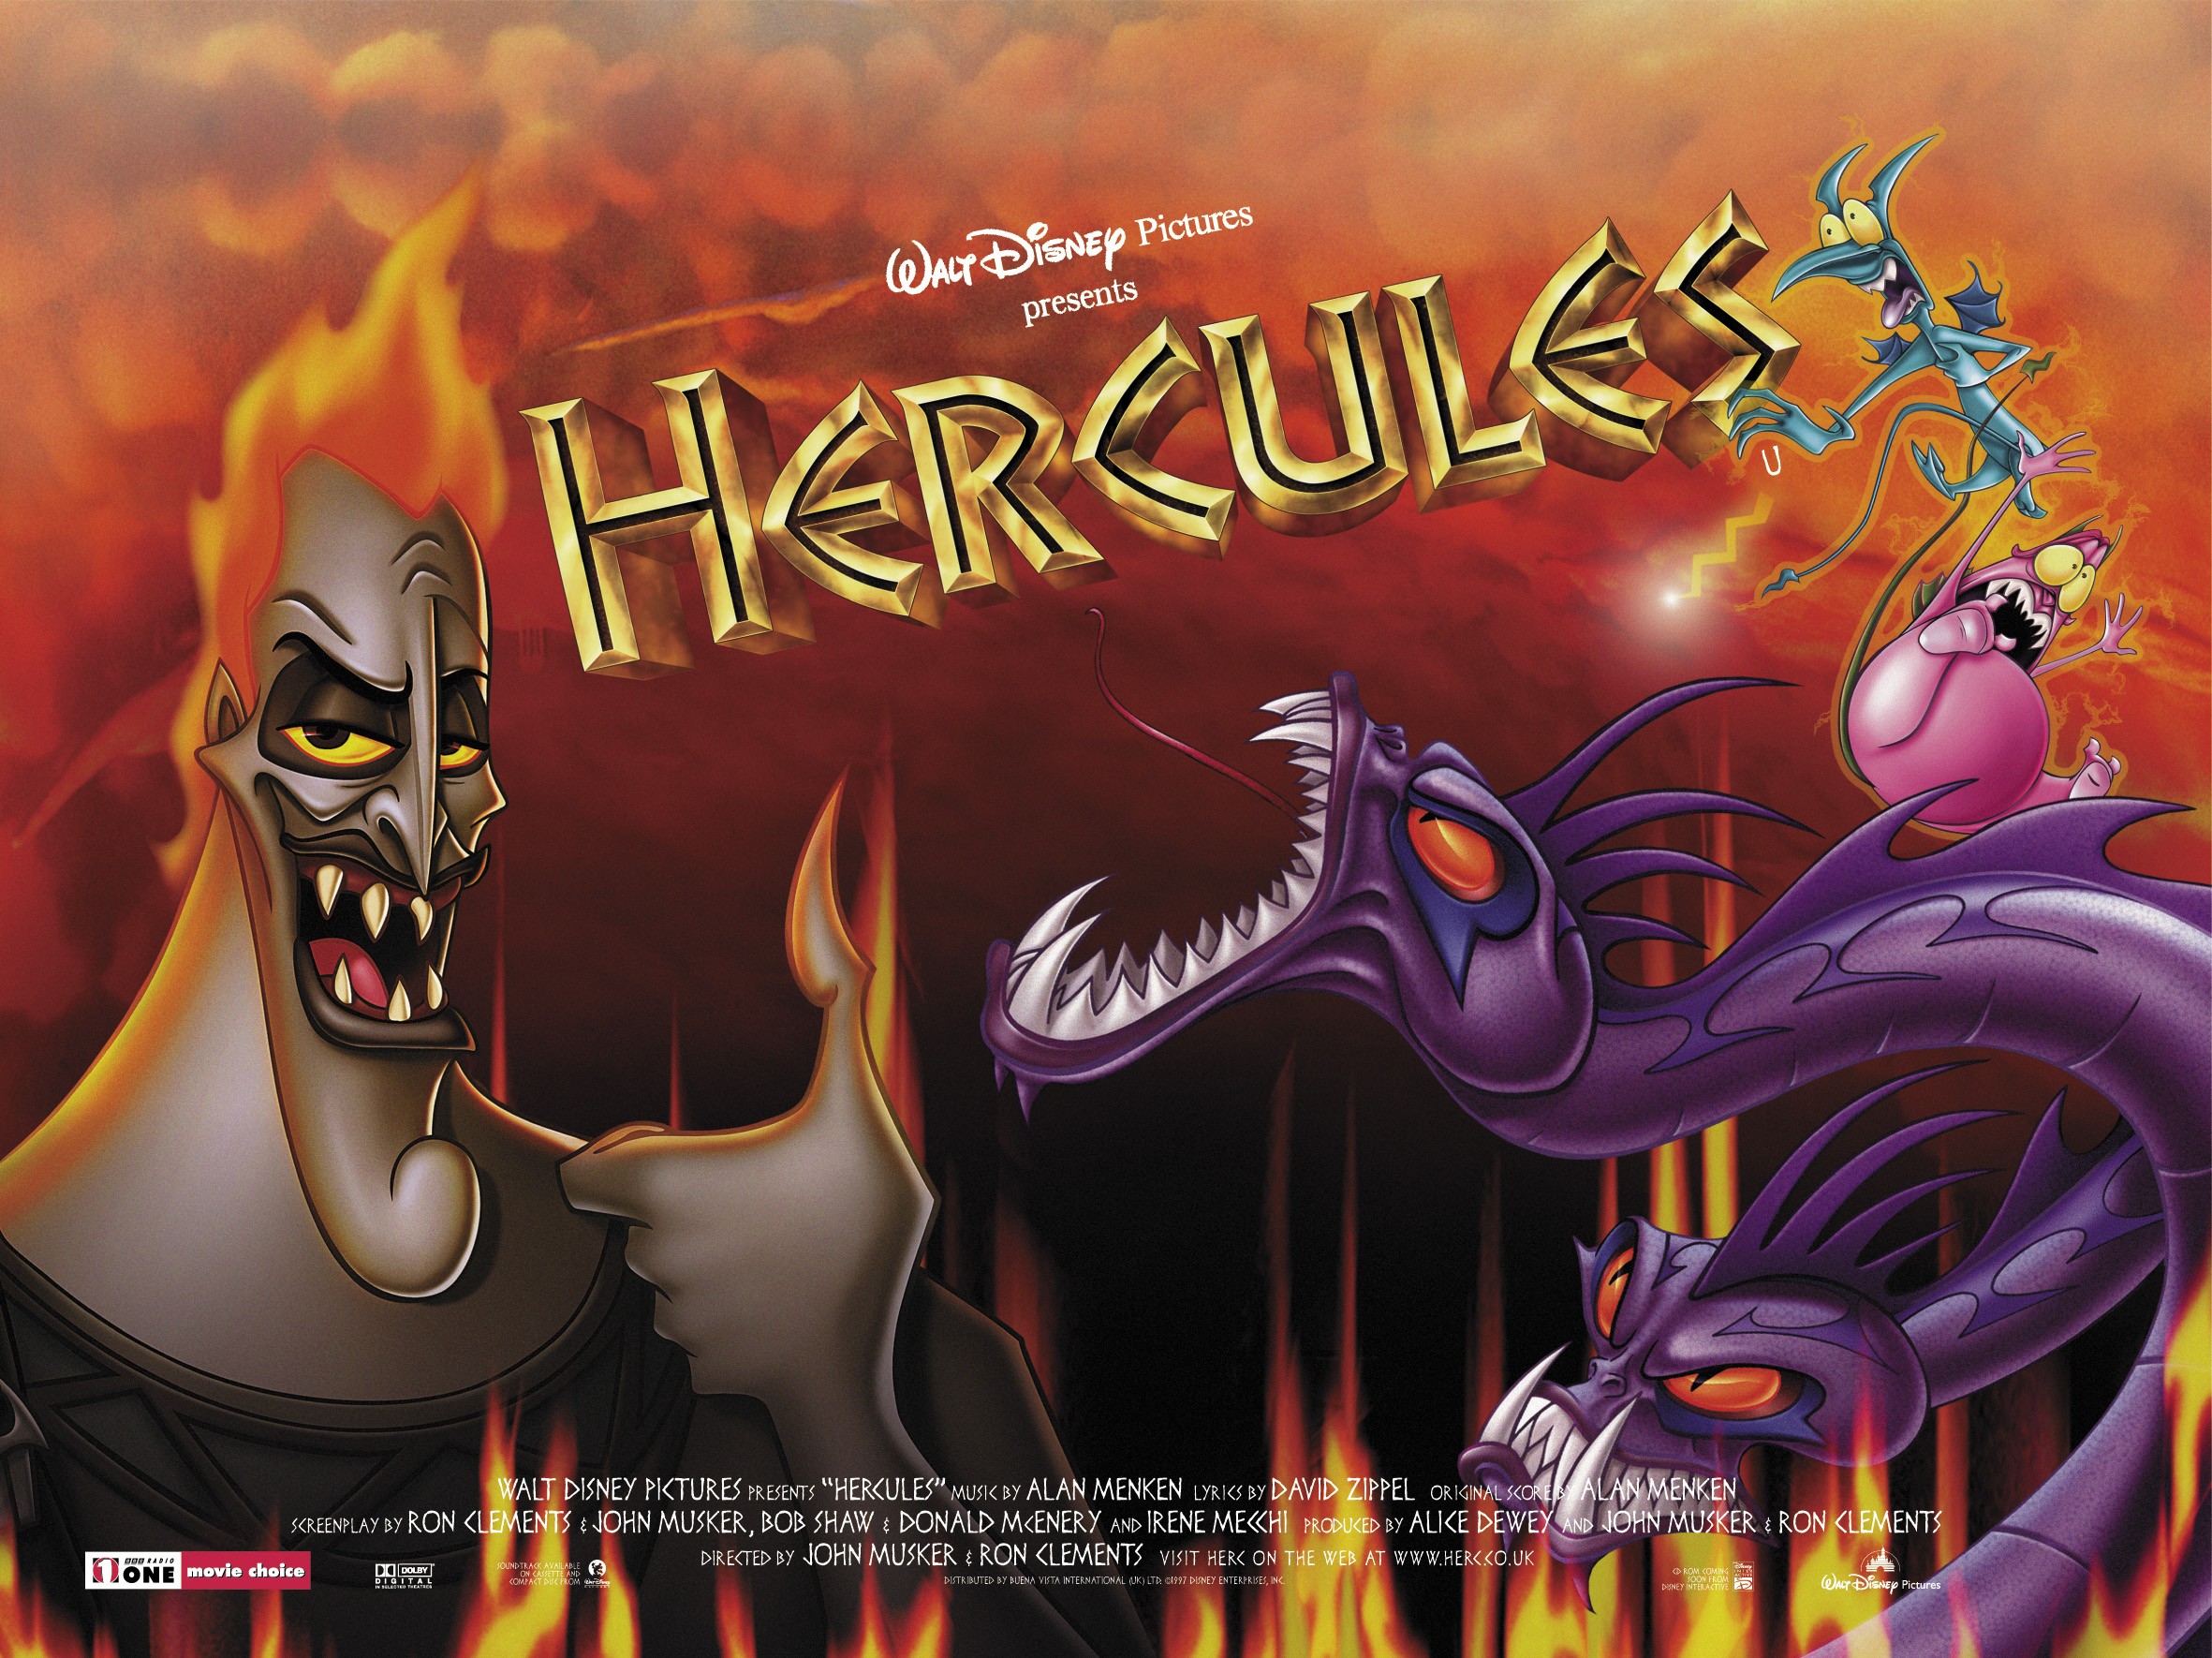 Mega Sized Movie Poster Image for Hercules (#12 of 13)